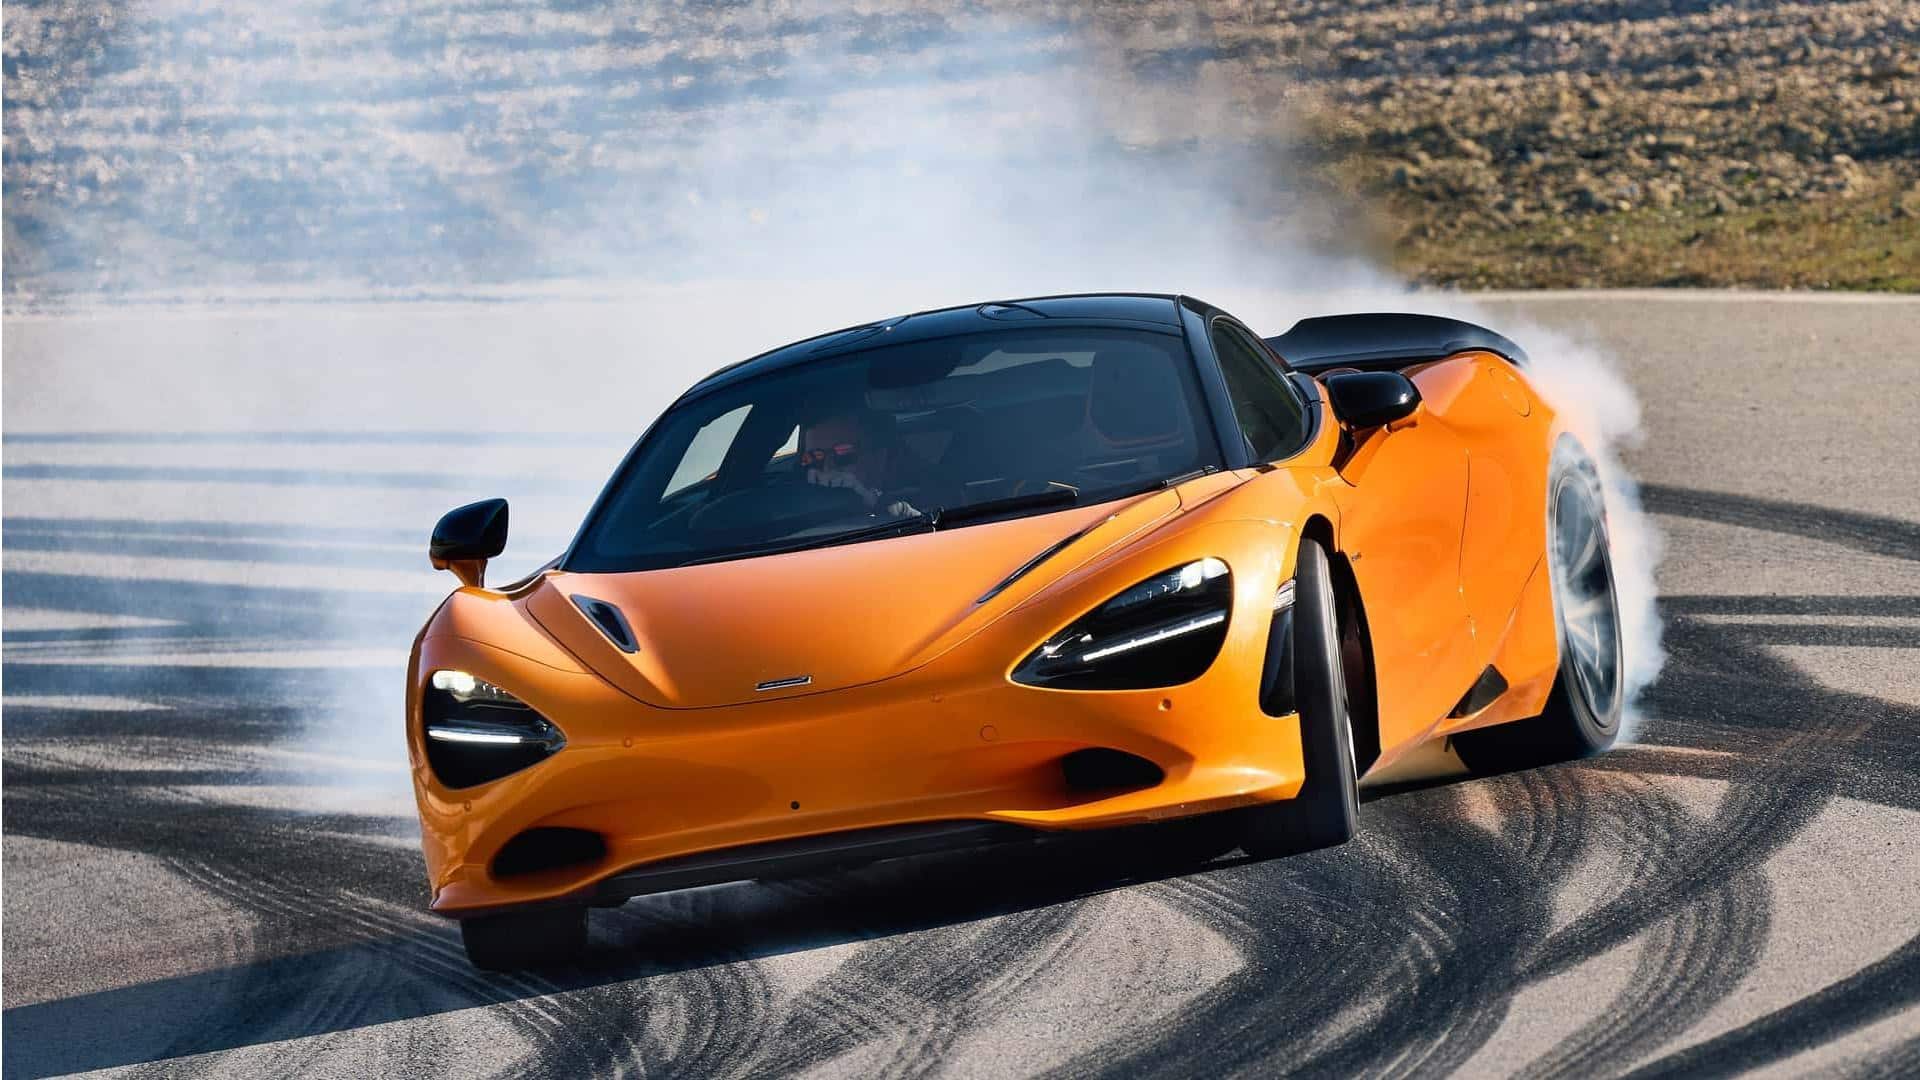 McLaren secures its supercar future with new hybrid V8 engine